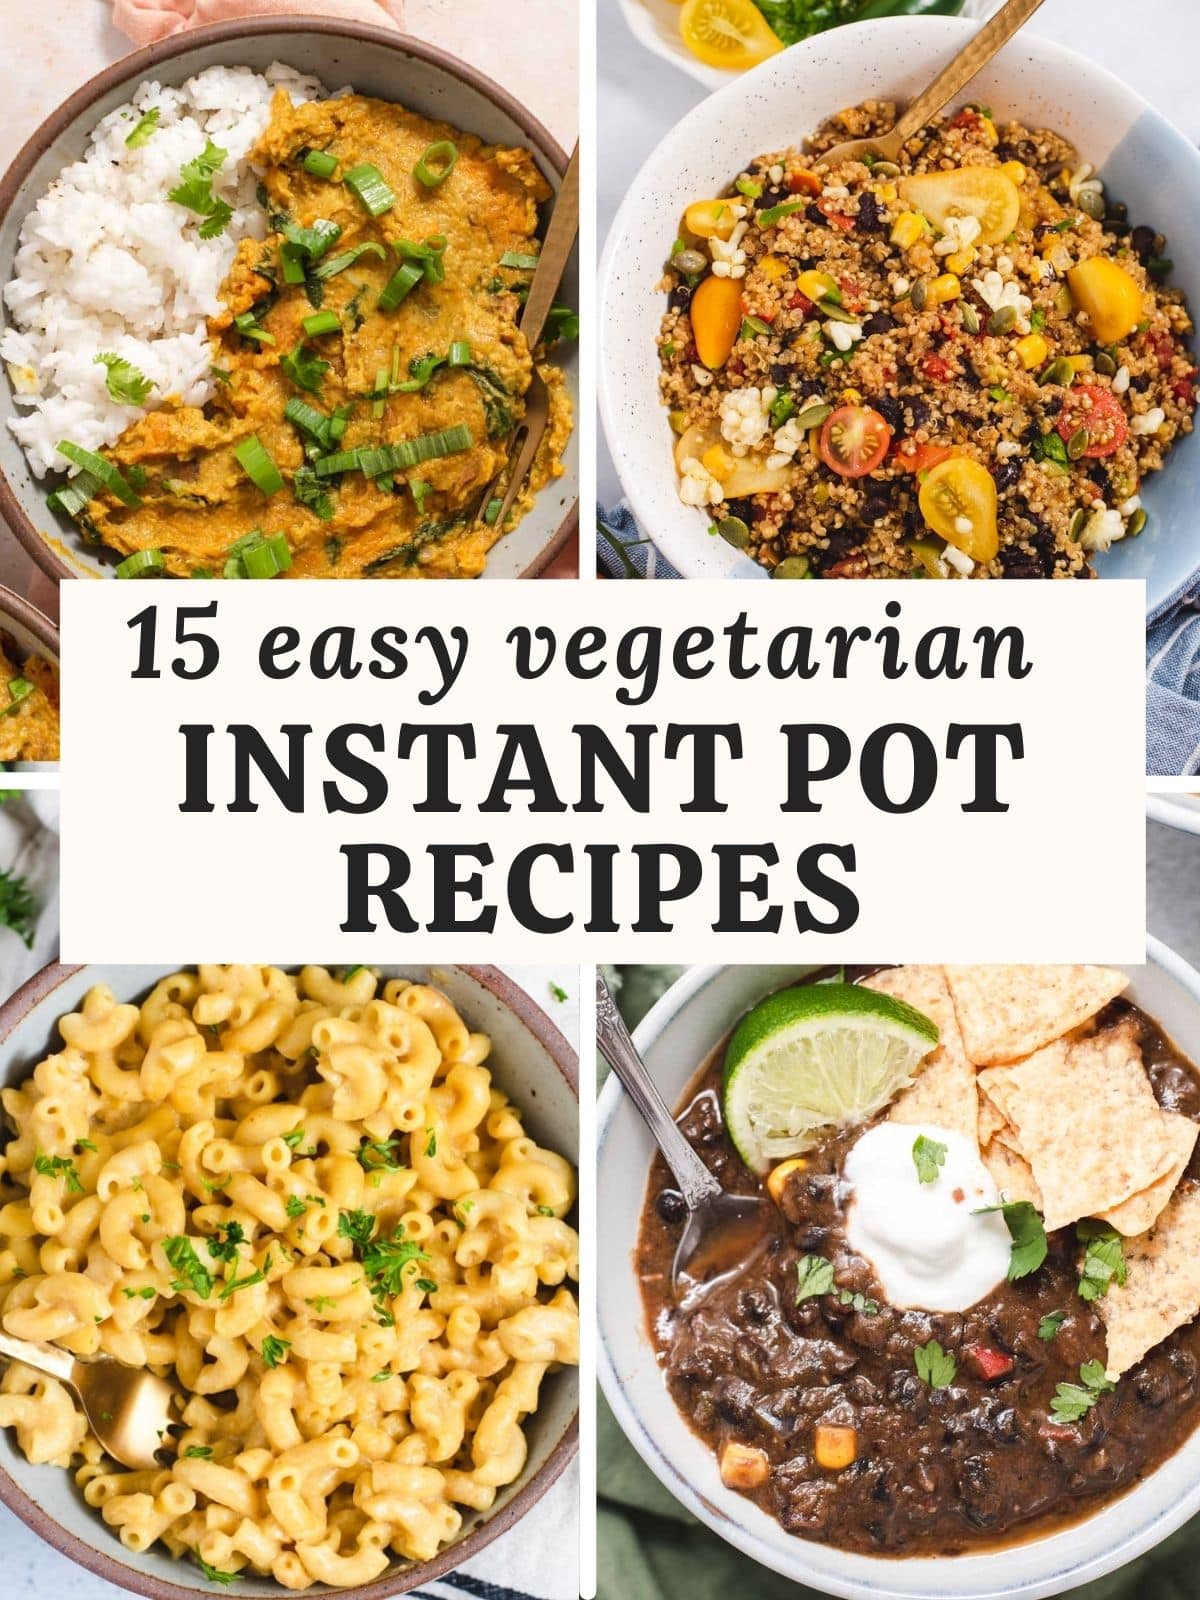 Healthy Instant Pot Recipes For Dinner